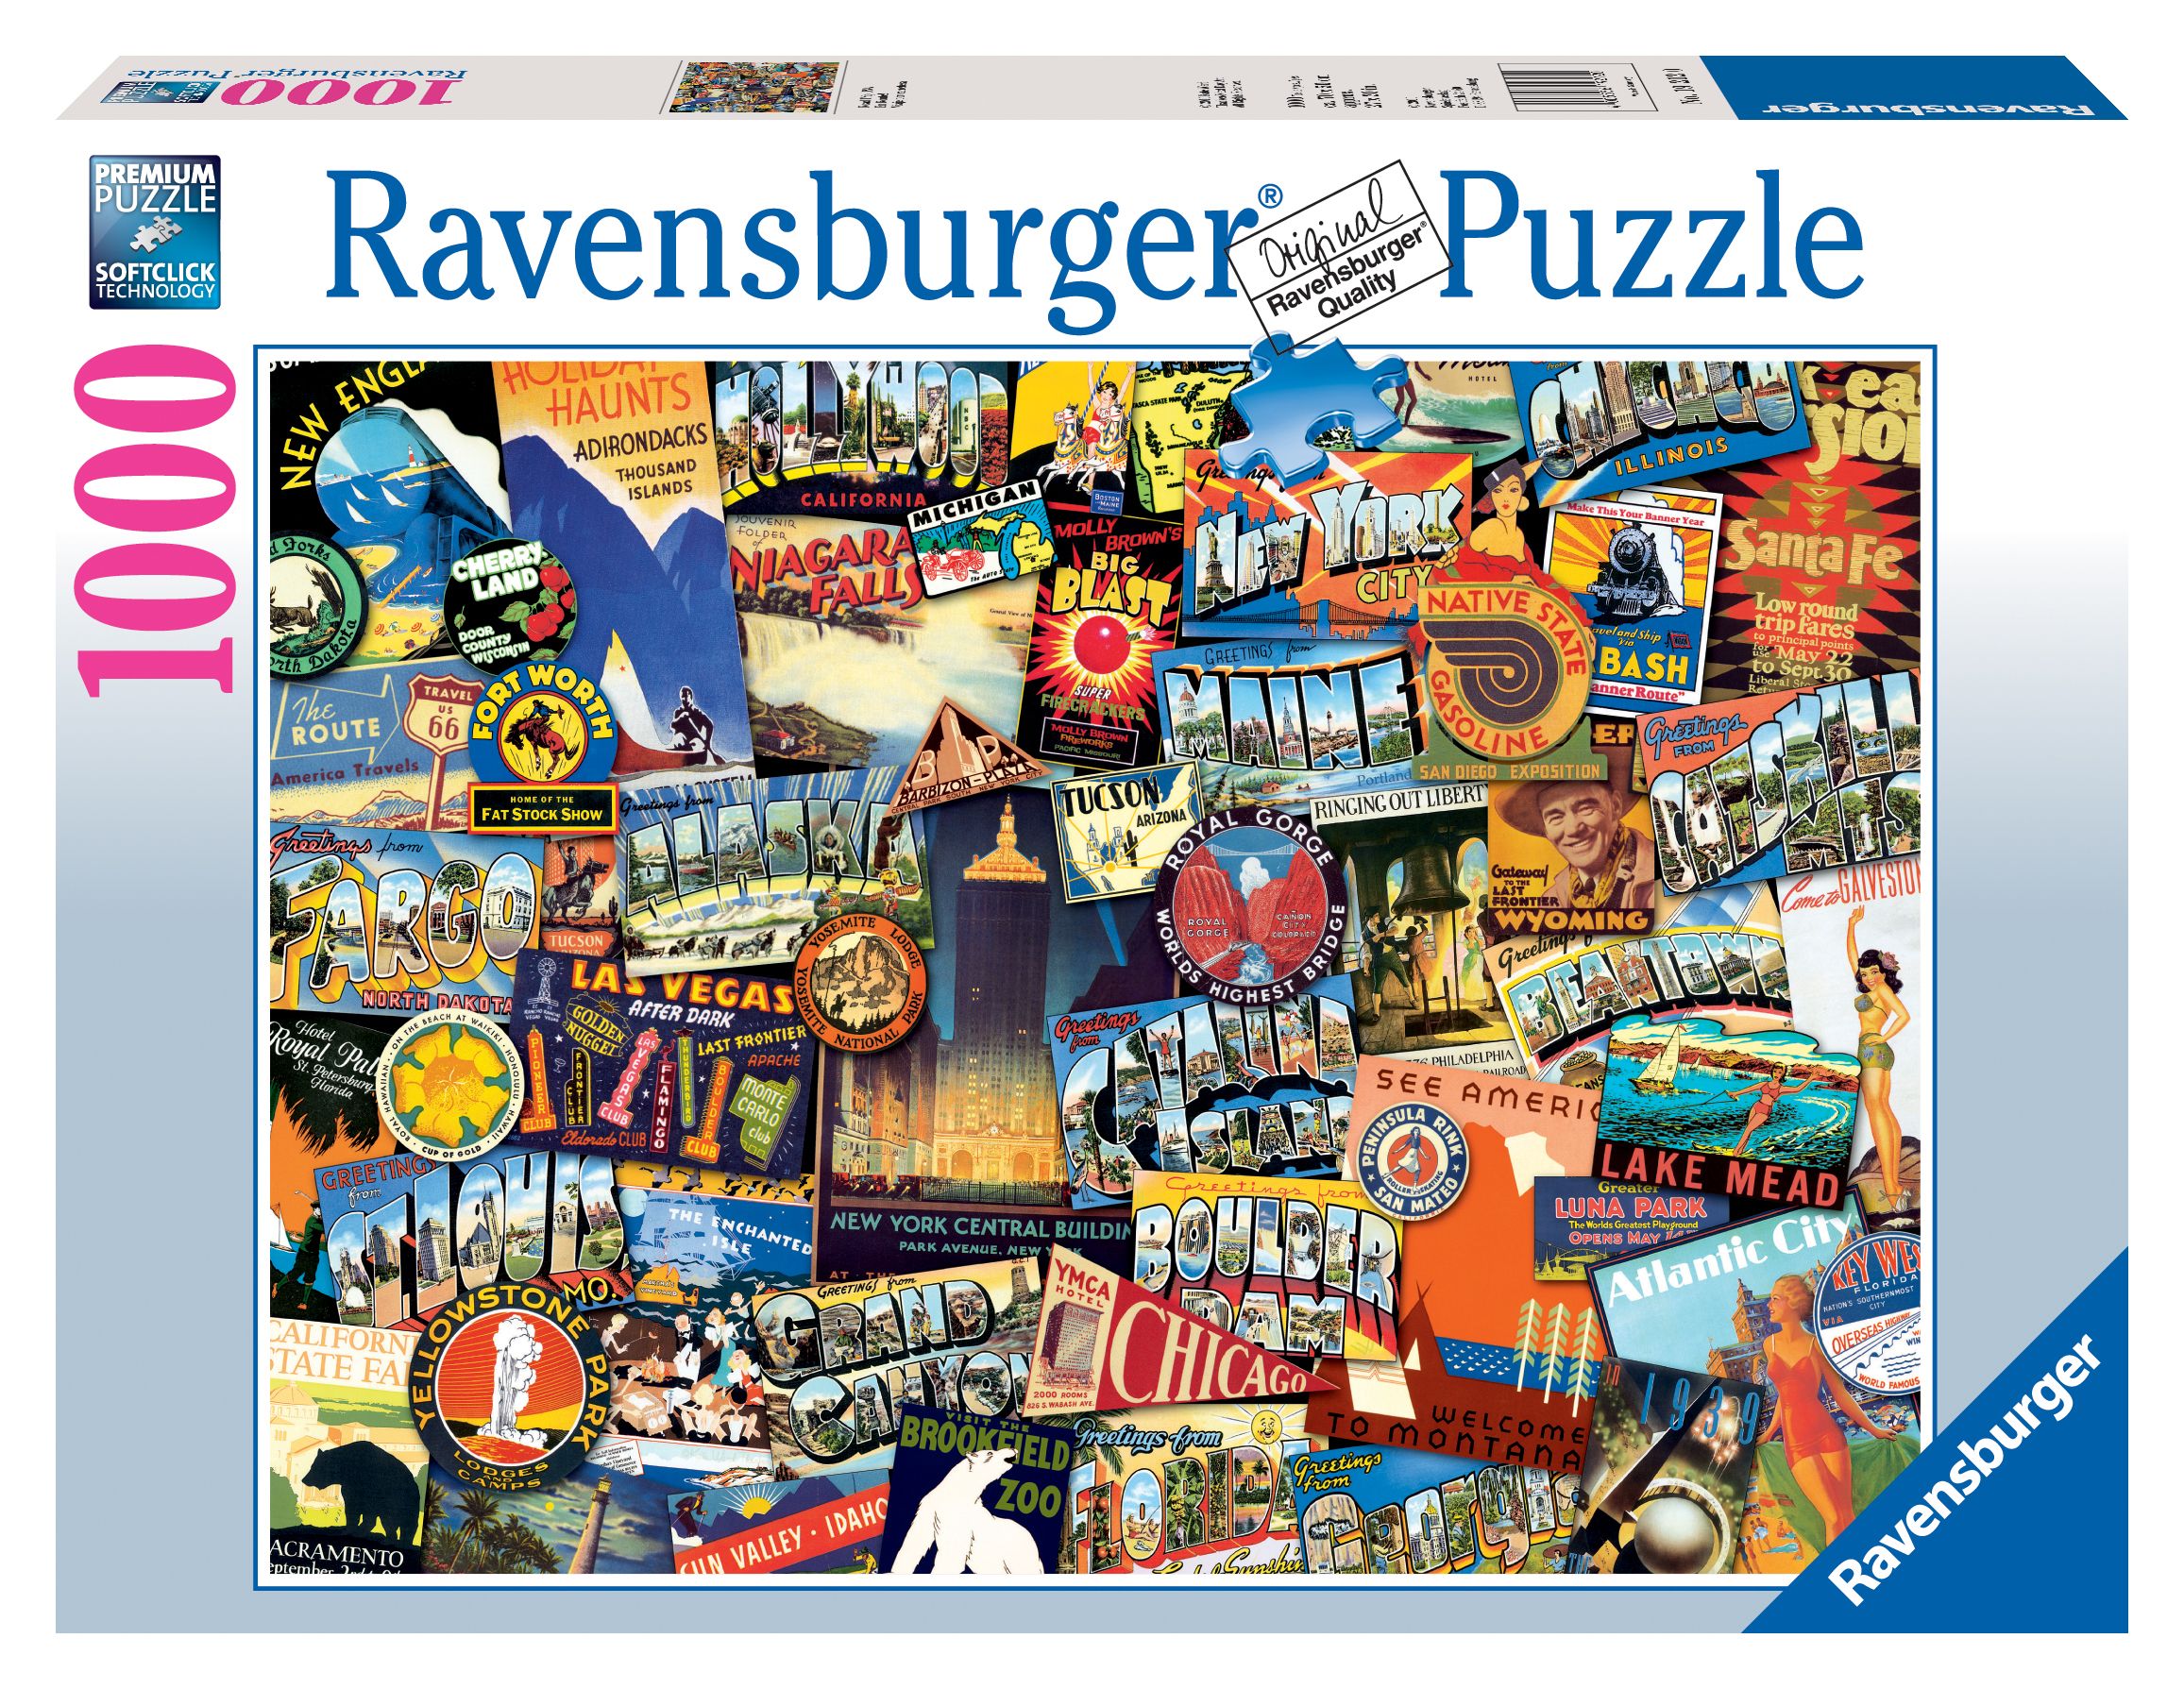 Ravensburger - Road Trip USA - 1000 Piece Jigsaw Puzzle - image 1 of 2